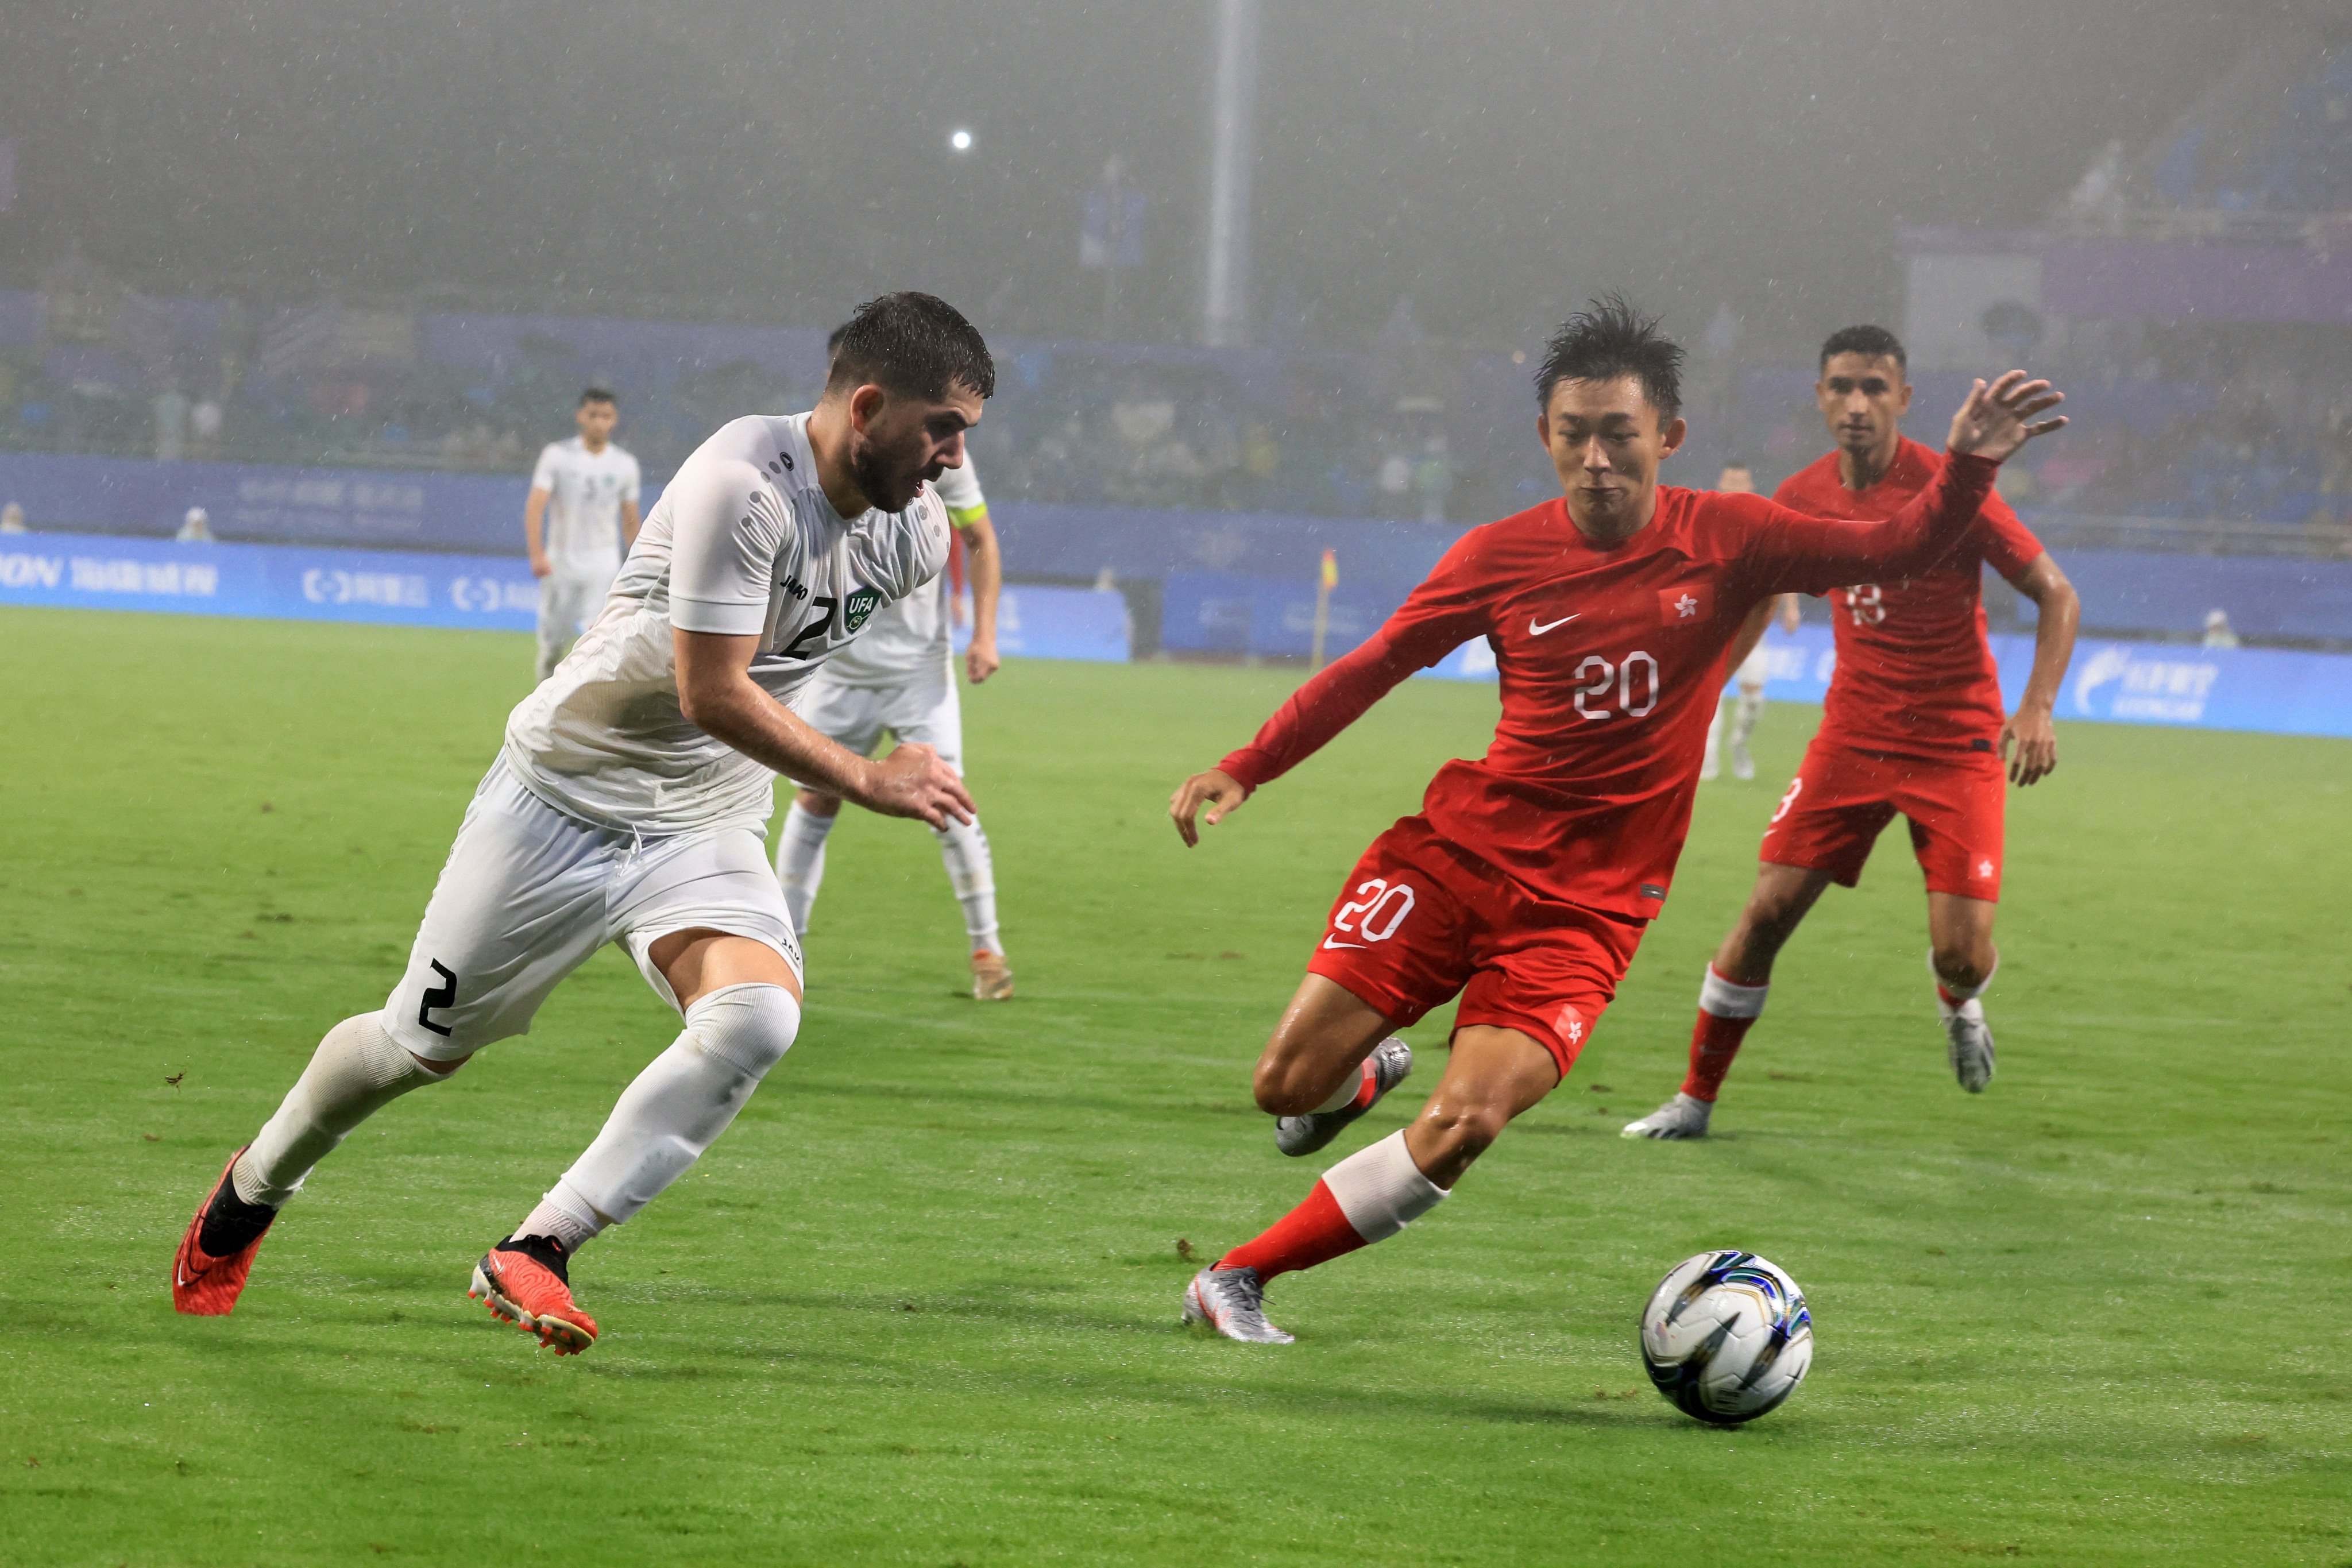 Hong Kong’s Sohgo Ichikawa was brought into the starting line-up for Monday’s game against Uzbekistan. Photo: Dickson Lee